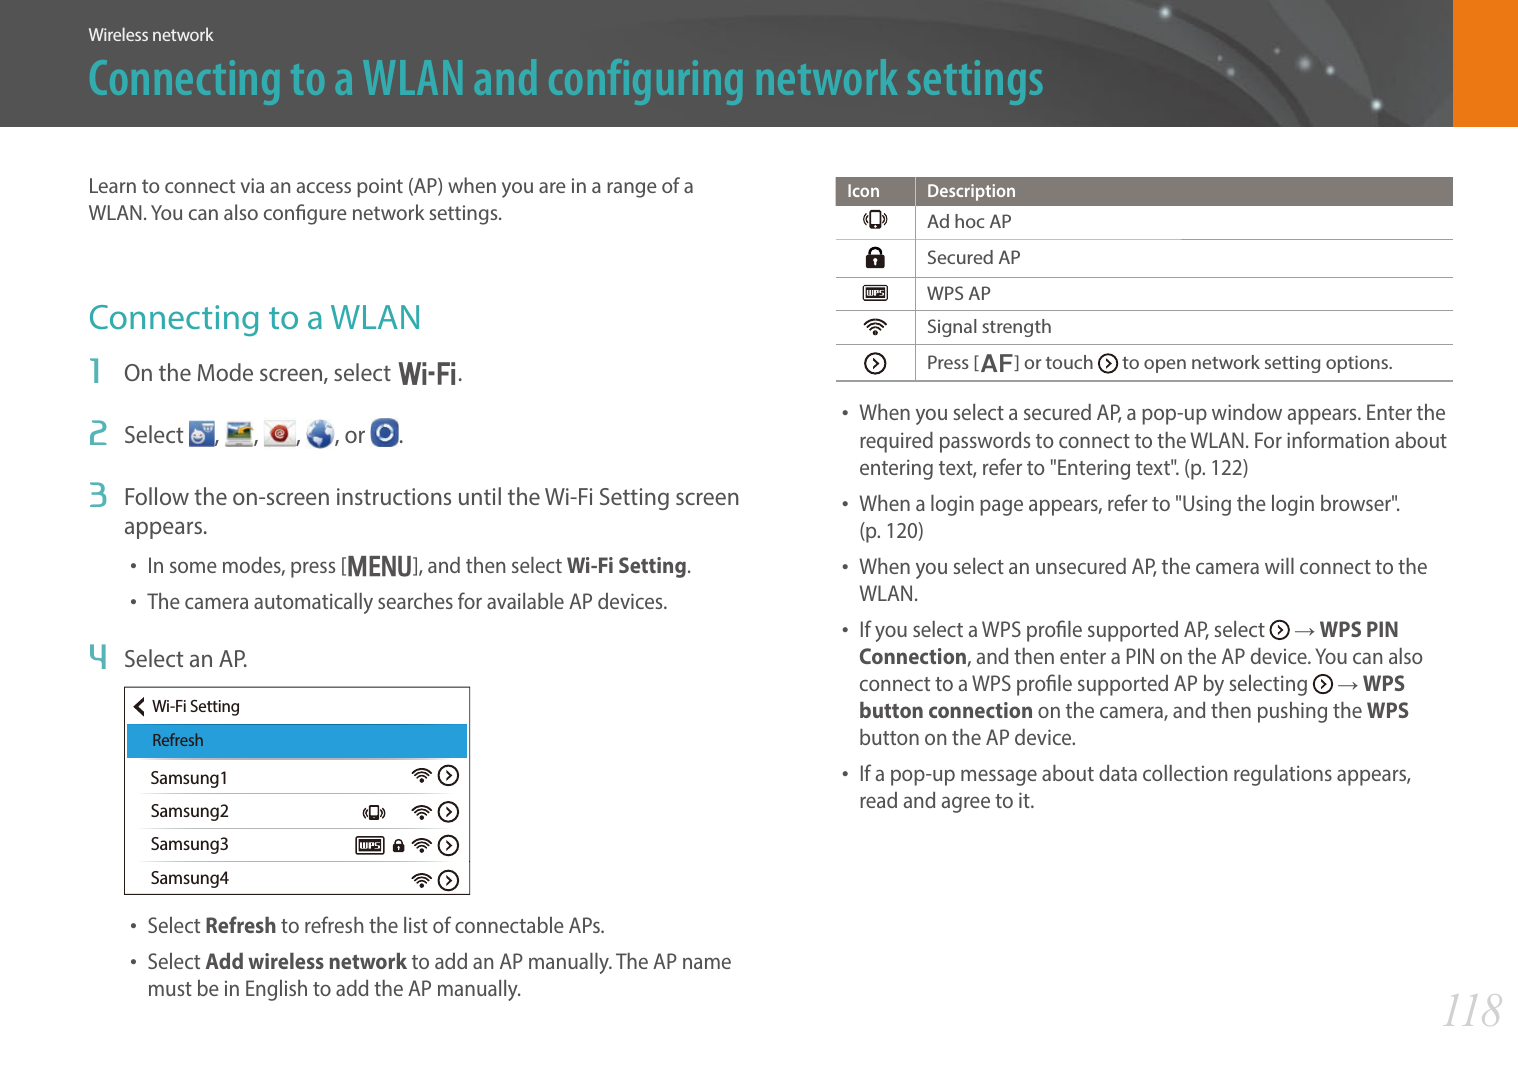 118Wireless networkConnecting to a WLAN and configuring network settingsLearn to connect via an access point (AP) when you are in a range of a WLAN. You can also congure network settings.Connecting to a WLAN1  On the Mode screen, select B.2  Select  ,  ,  , , or  .3  Follow the on-screen instructions until the Wi-Fi Setting screen appears.• In some modes, press [m], and then select Wi-Fi Setting.• The camera automatically searches for available AP devices.4  Select an AP.Samsung1Samsung2Samsung3Samsung4Wi-Fi SettingRefresh• Select Refresh to refresh the list of connectable APs.• Select Add wireless network to add an AP manually. The AP name must be in English to add the AP manually.Icon DescriptionAd hoc APSecured APWPS APSignal strengthPress [F] or touch   to open network setting options.• When you select a secured AP, a pop-up window appears. Enter the required passwords to connect to the WLAN. For information about entering text, refer to &quot;Entering text&quot;. (p. 122)• When a login page appears, refer to &quot;Using the login browser&quot;.  (p. 120)• When you select an unsecured AP, the camera will connect to the WLAN.• If you select a WPS prole supported AP, select   ĺ WPS PIN Connection, and then enter a PIN on the AP device. You can also connect to a WPS prole supported AP by selecting   ĺ WPS button connection on the camera, and then pushing the WPS button on the AP device.• If a pop-up message about data collection regulations appears, read and agree to it. 